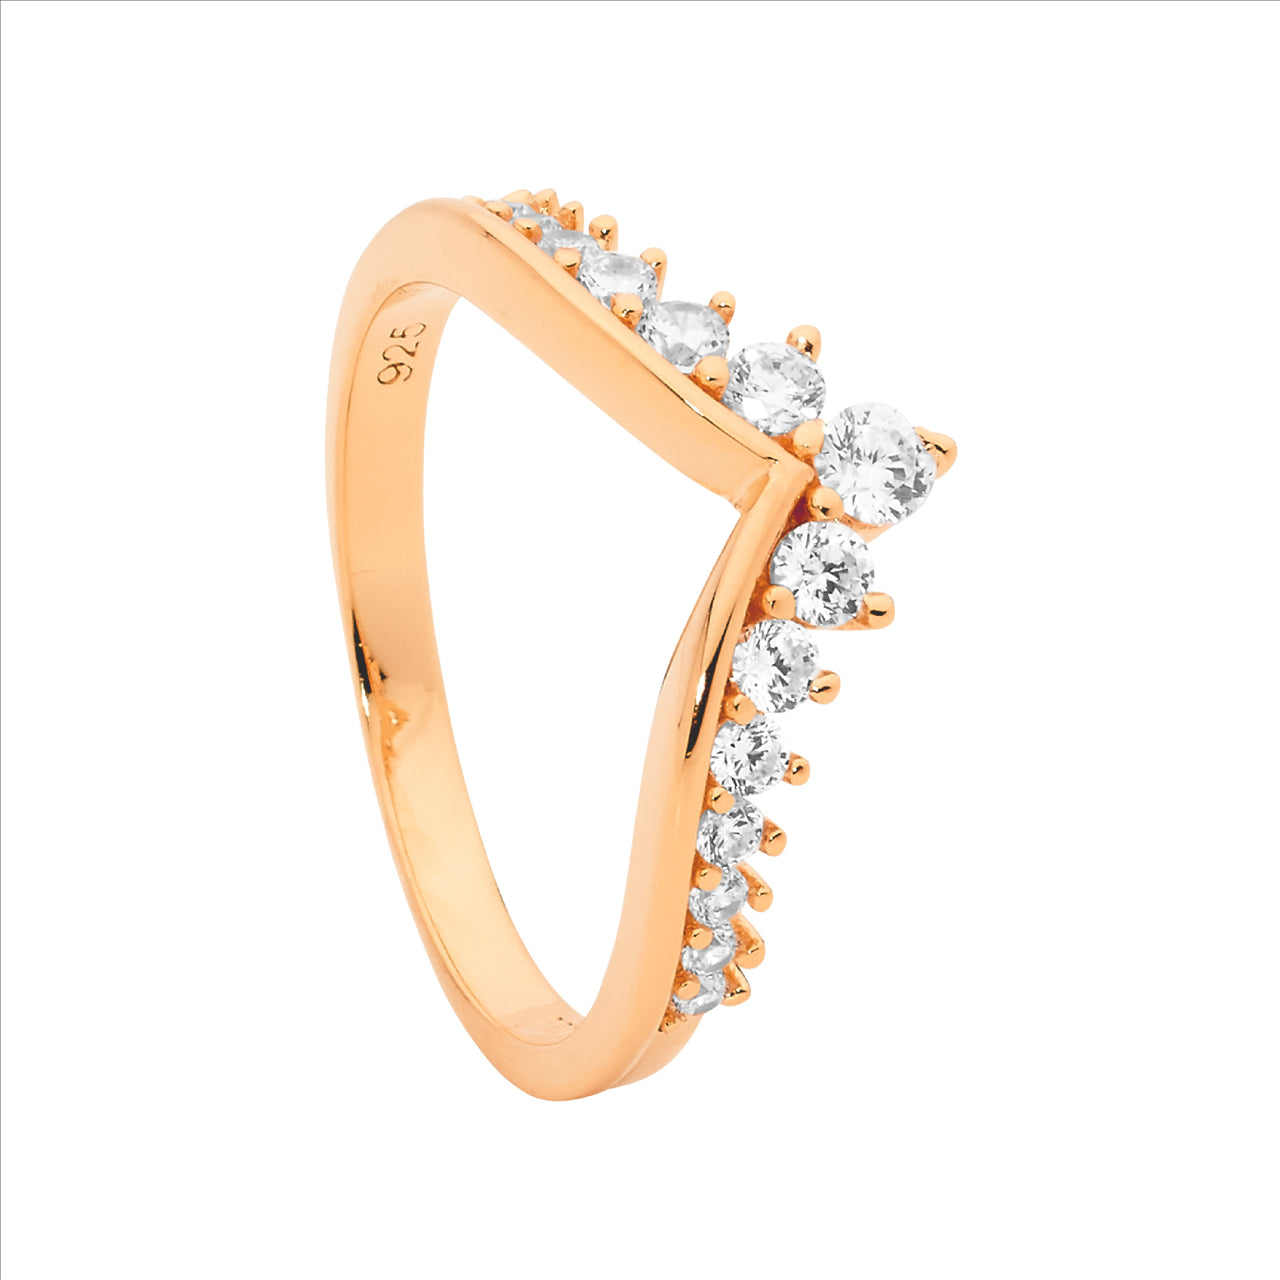 Sterling Silver Rose Gold Plated V Shaped Ring With Graduated White Cubic Zirconia